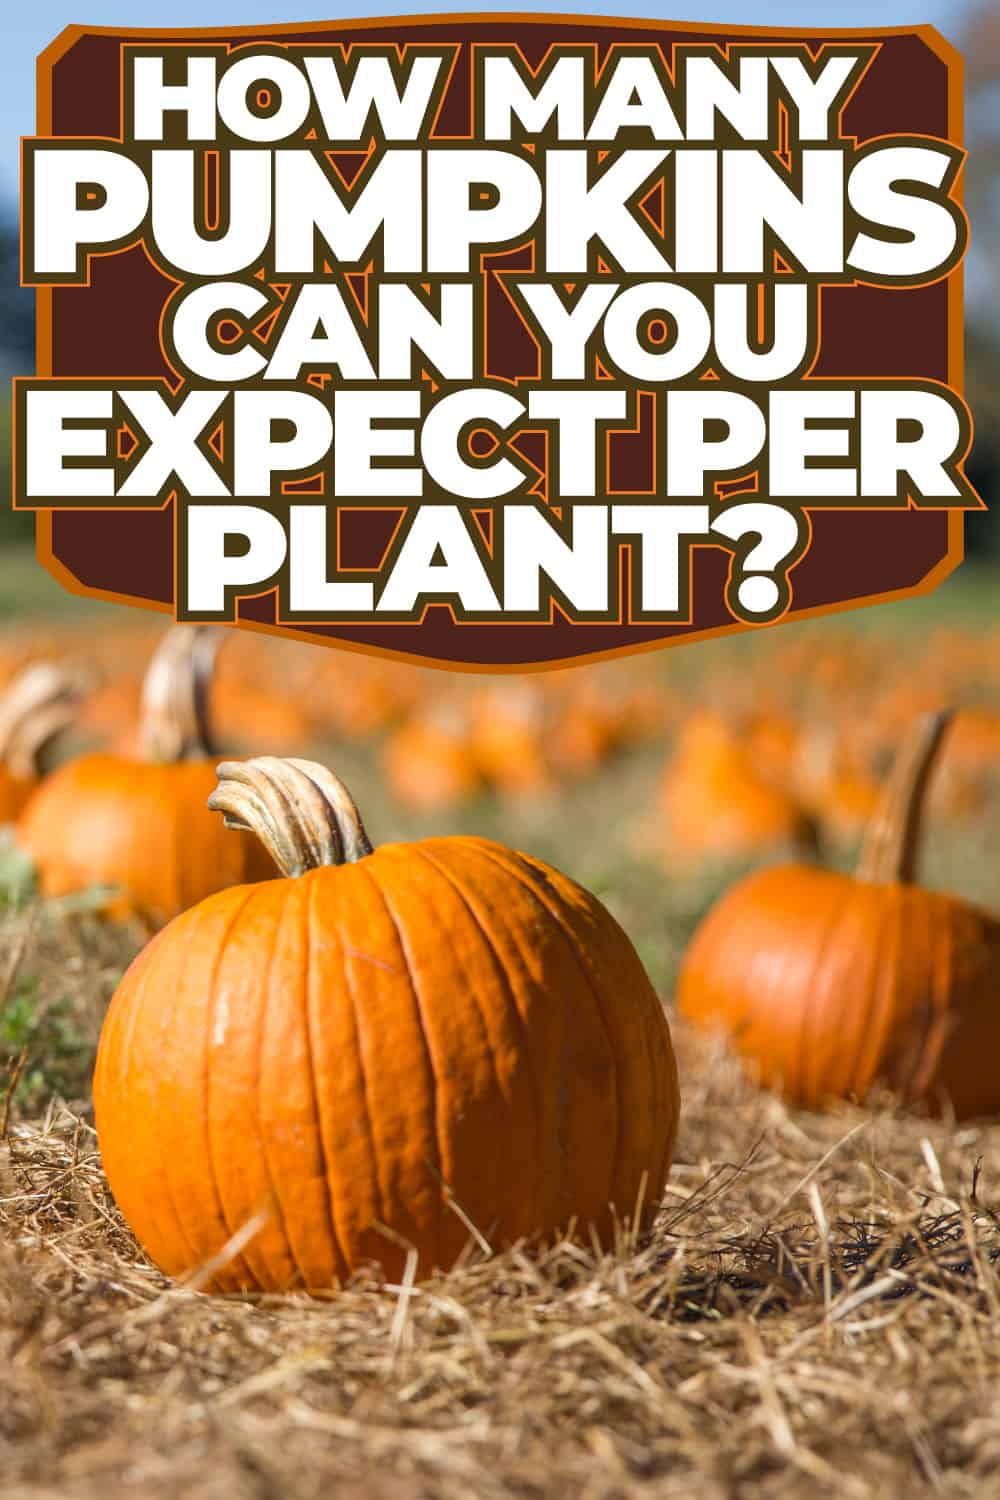 How Many Pumpkins Can You Expect Per Plant? - 1600X900